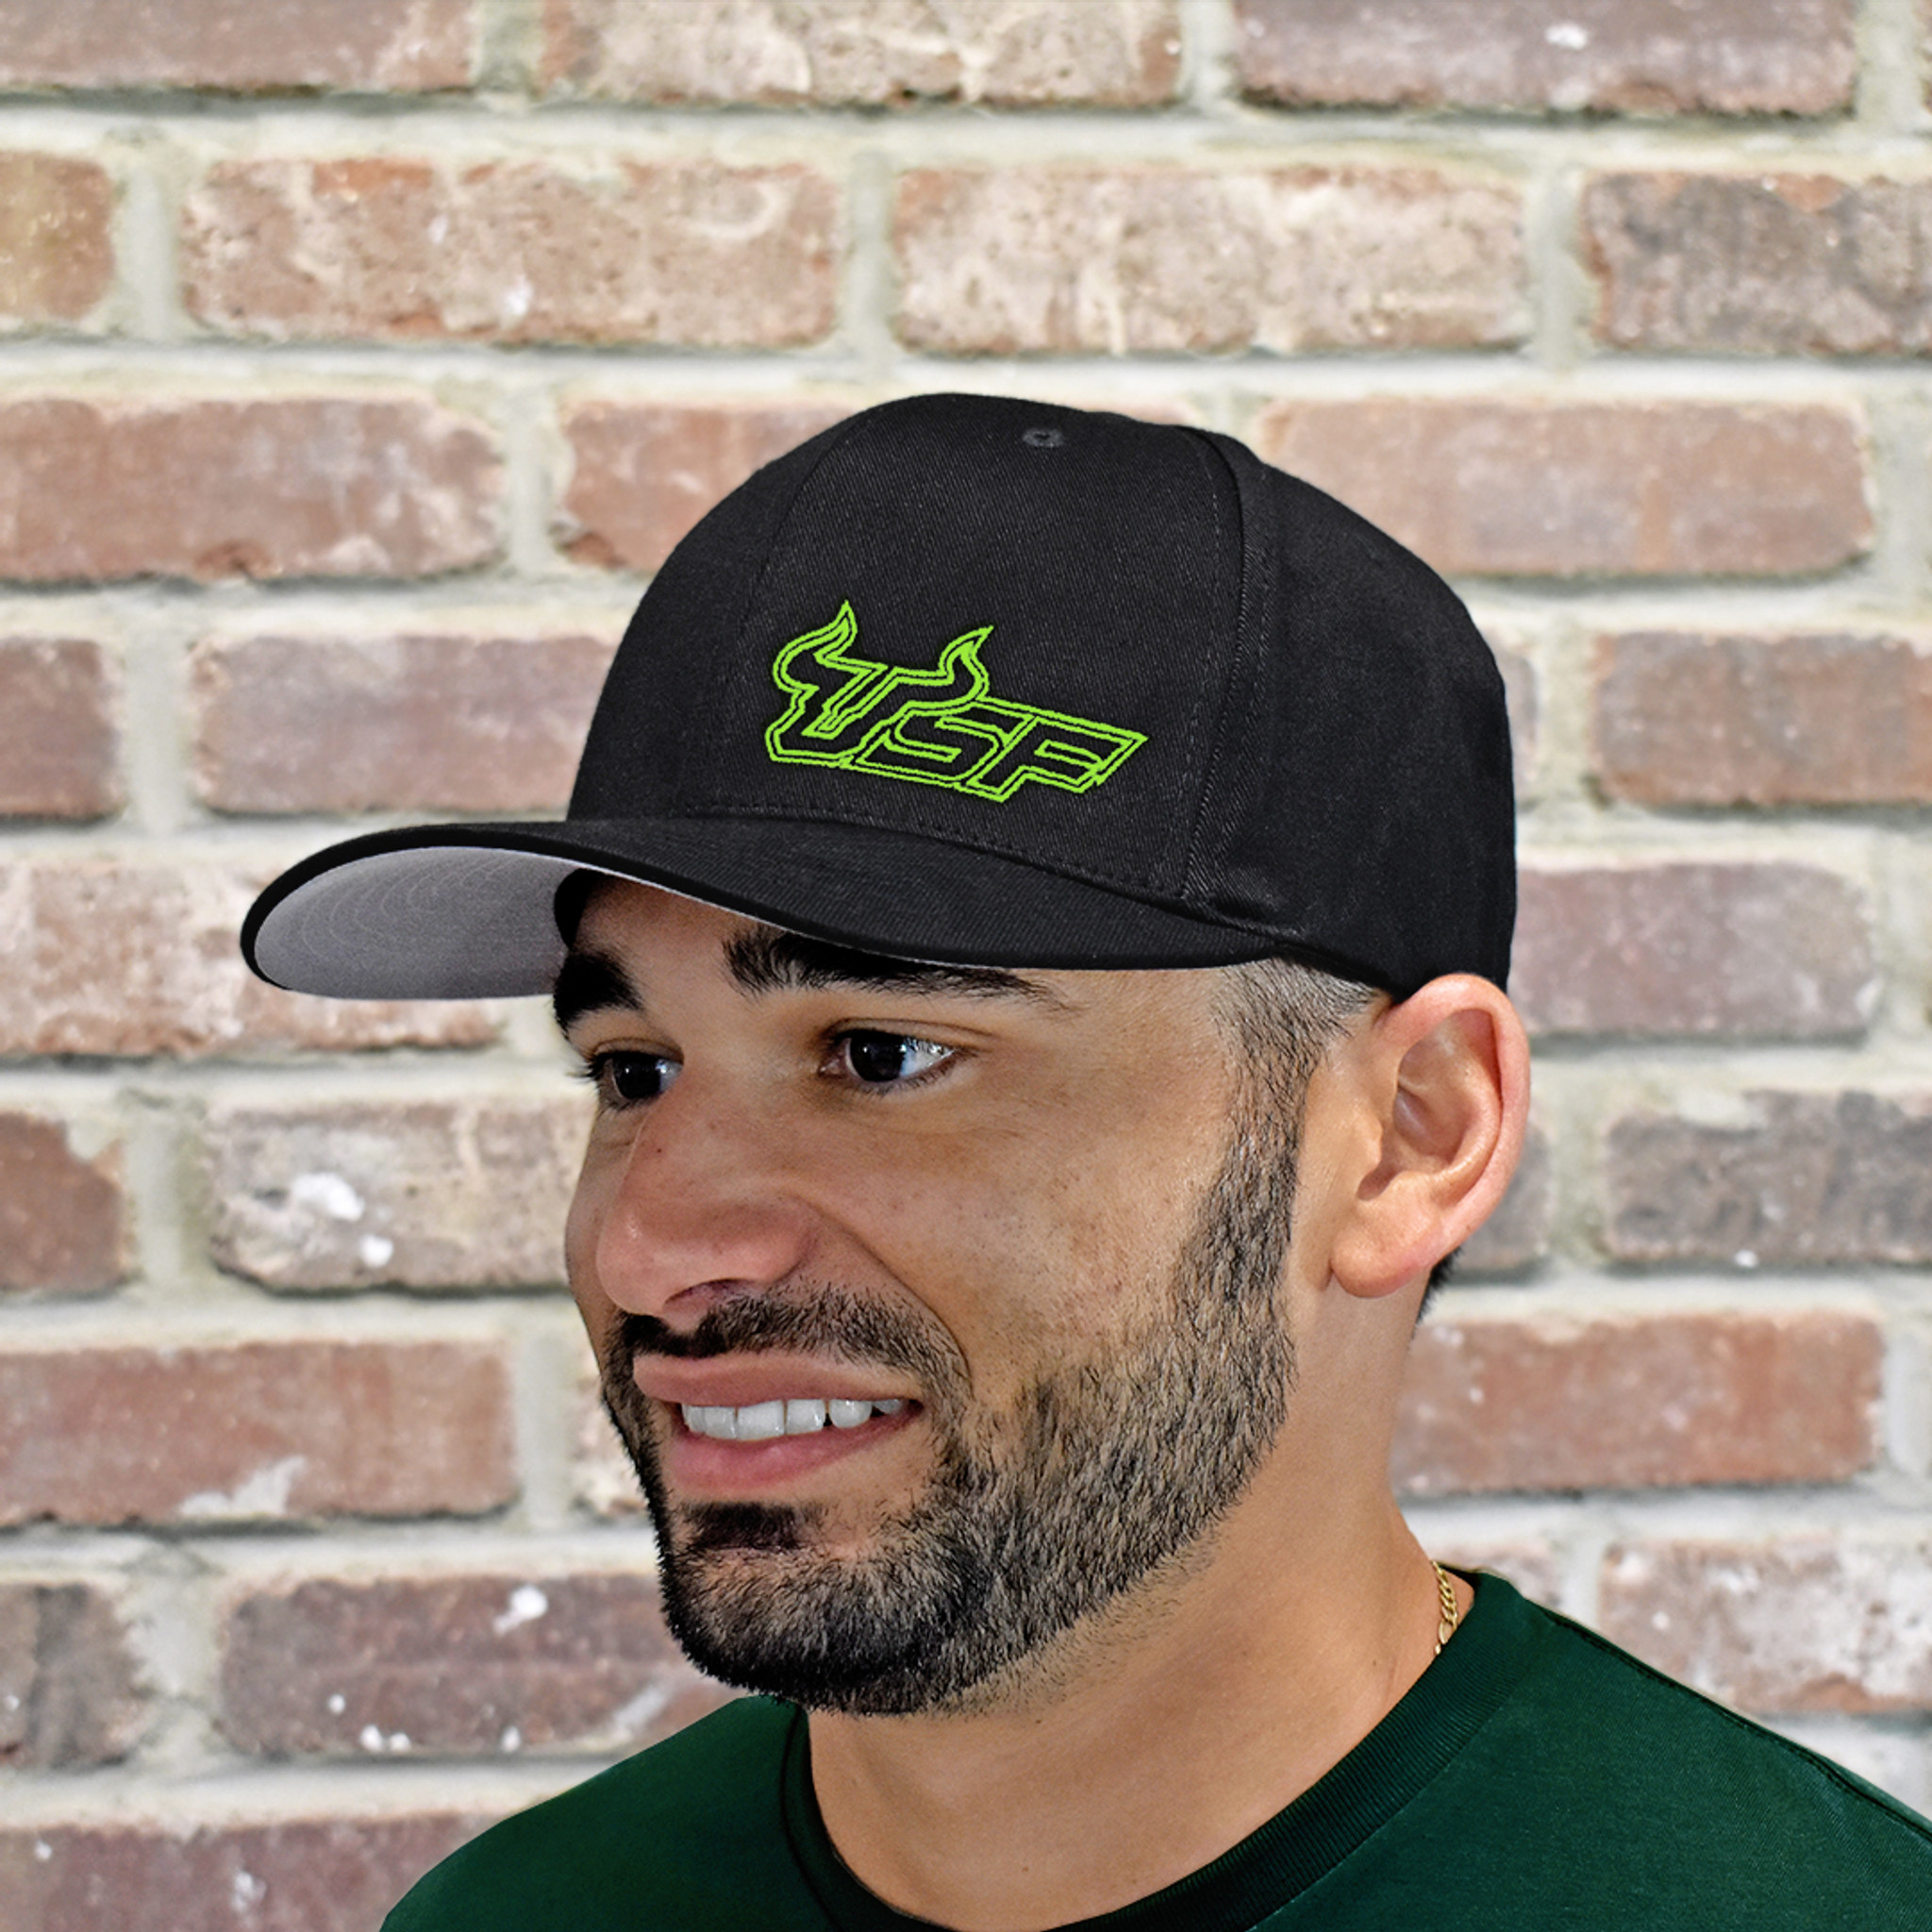 USF Premium Slime Green Black Fitted Flex Hat - South Florida Strong